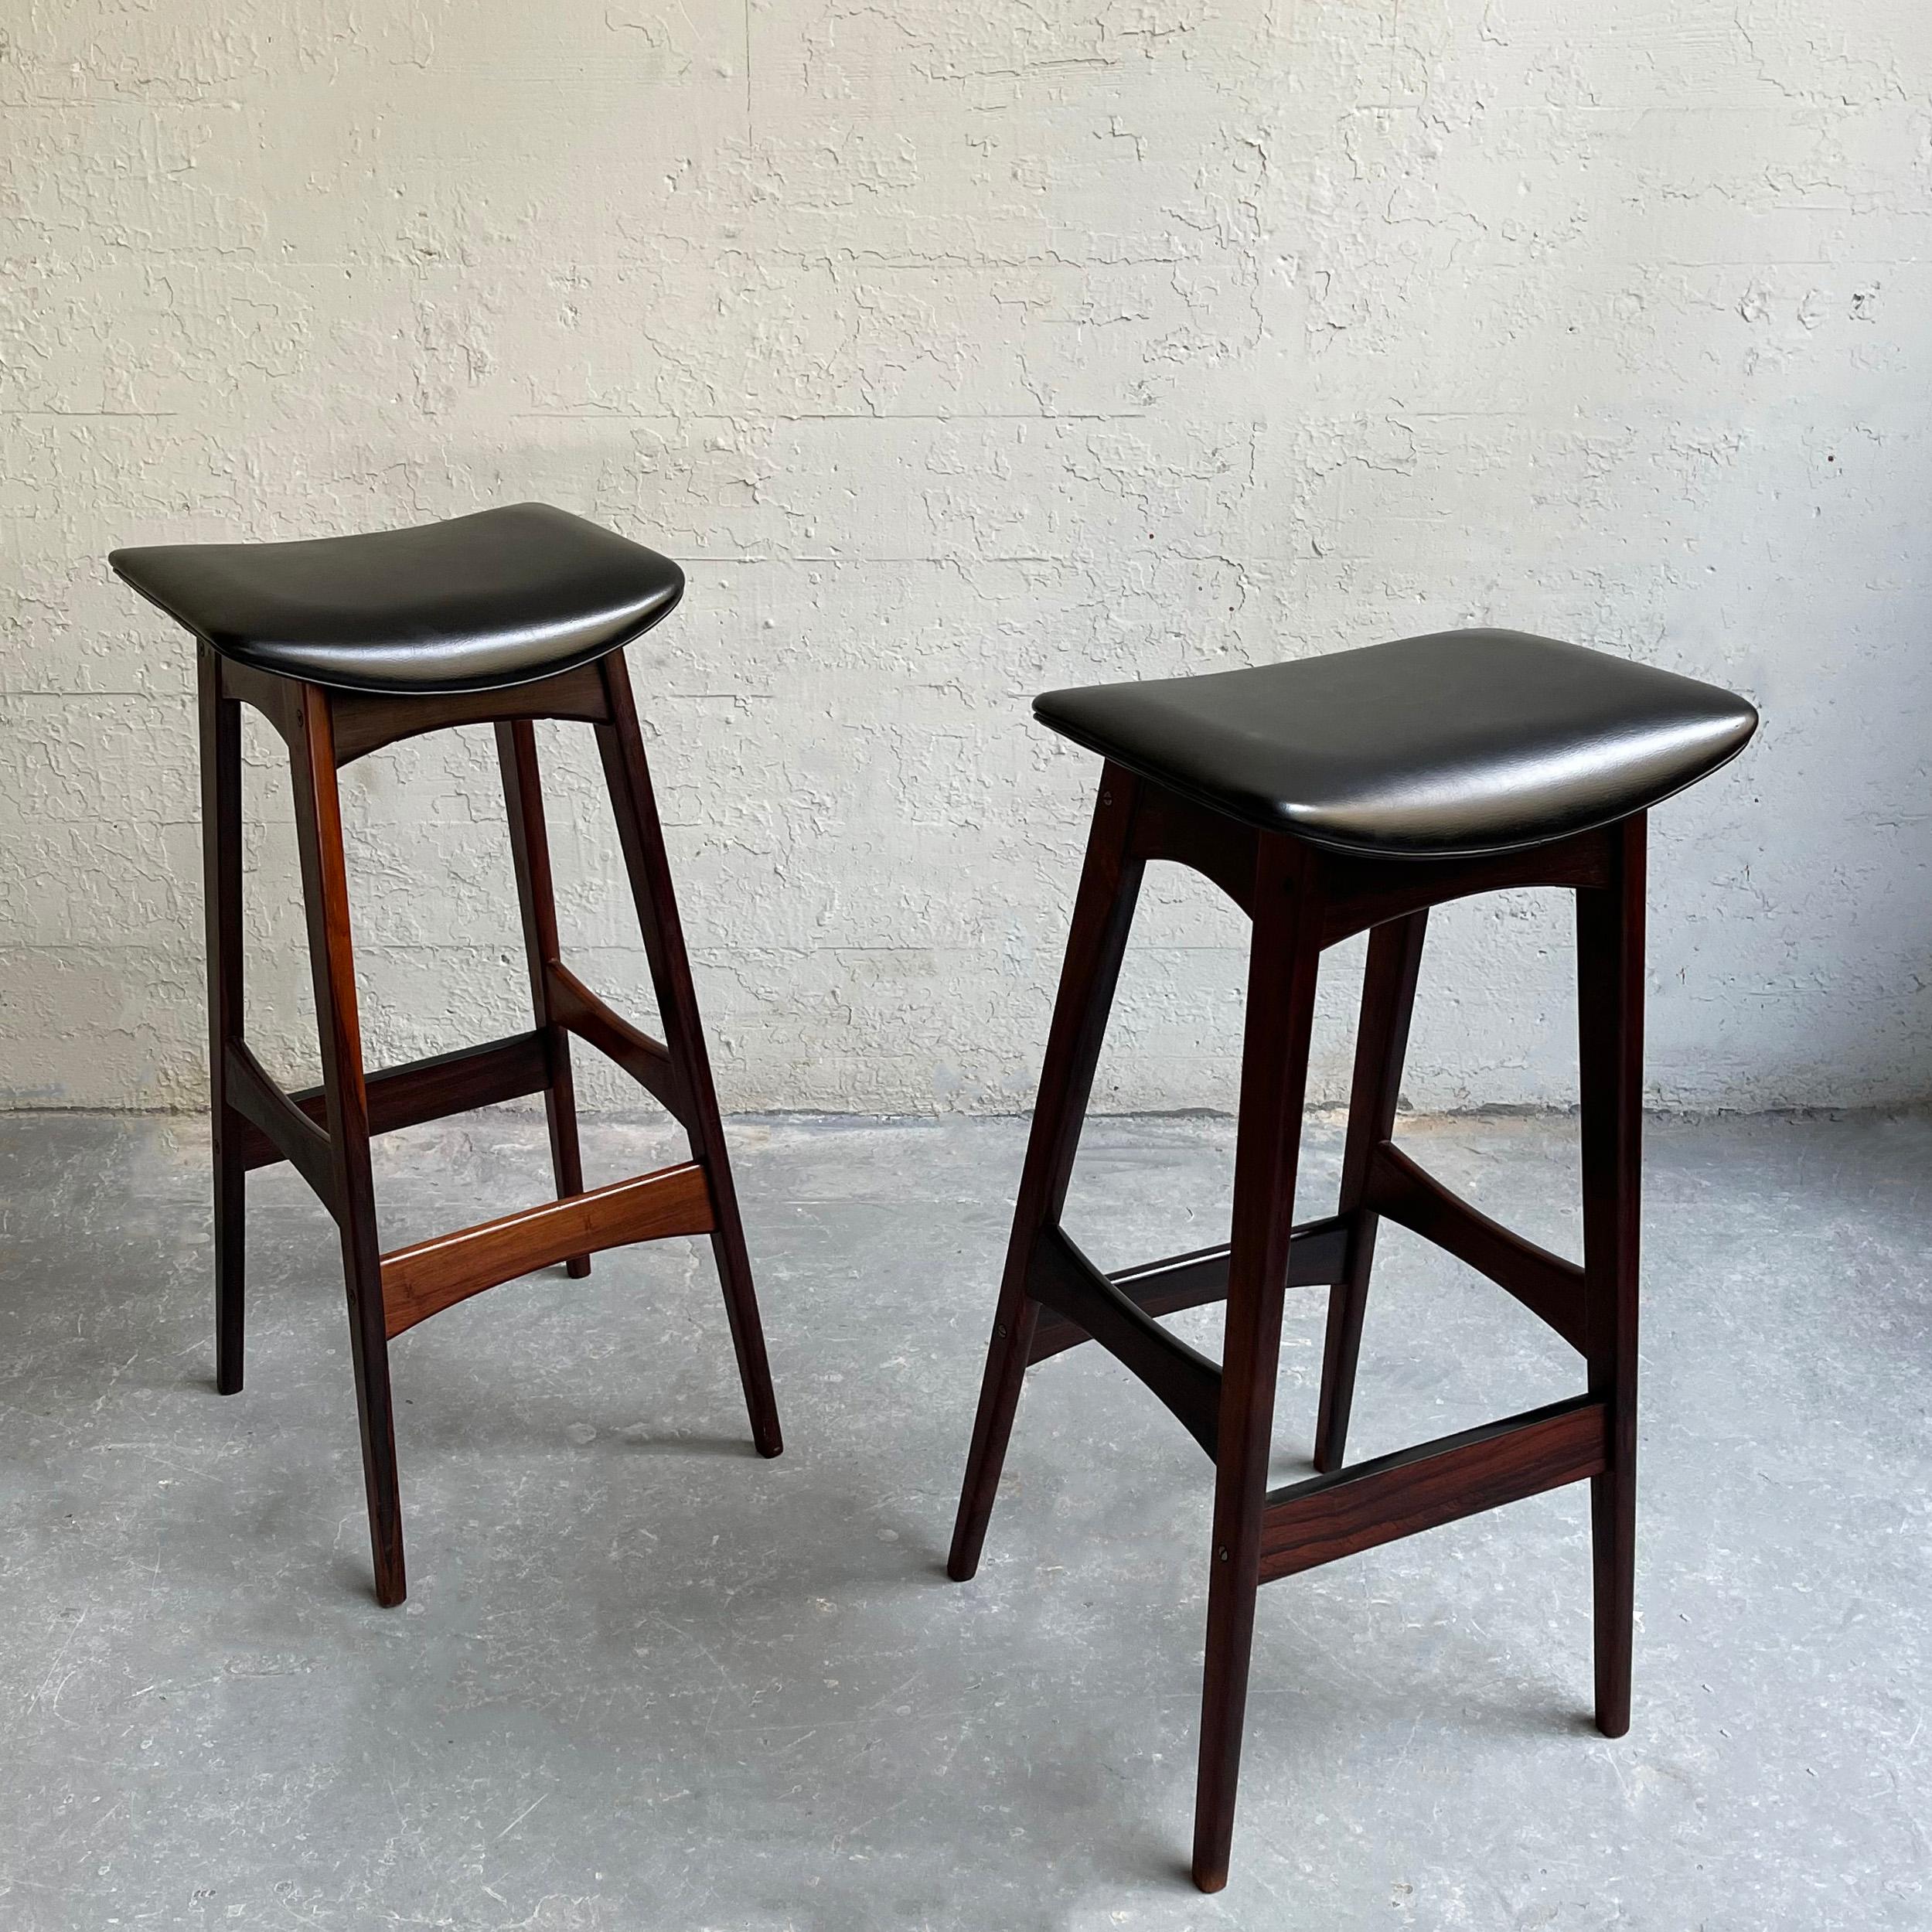 20th Century Danish Modern Rosewood and Vinyl Bar Stools by Johannes Andersen For Sale